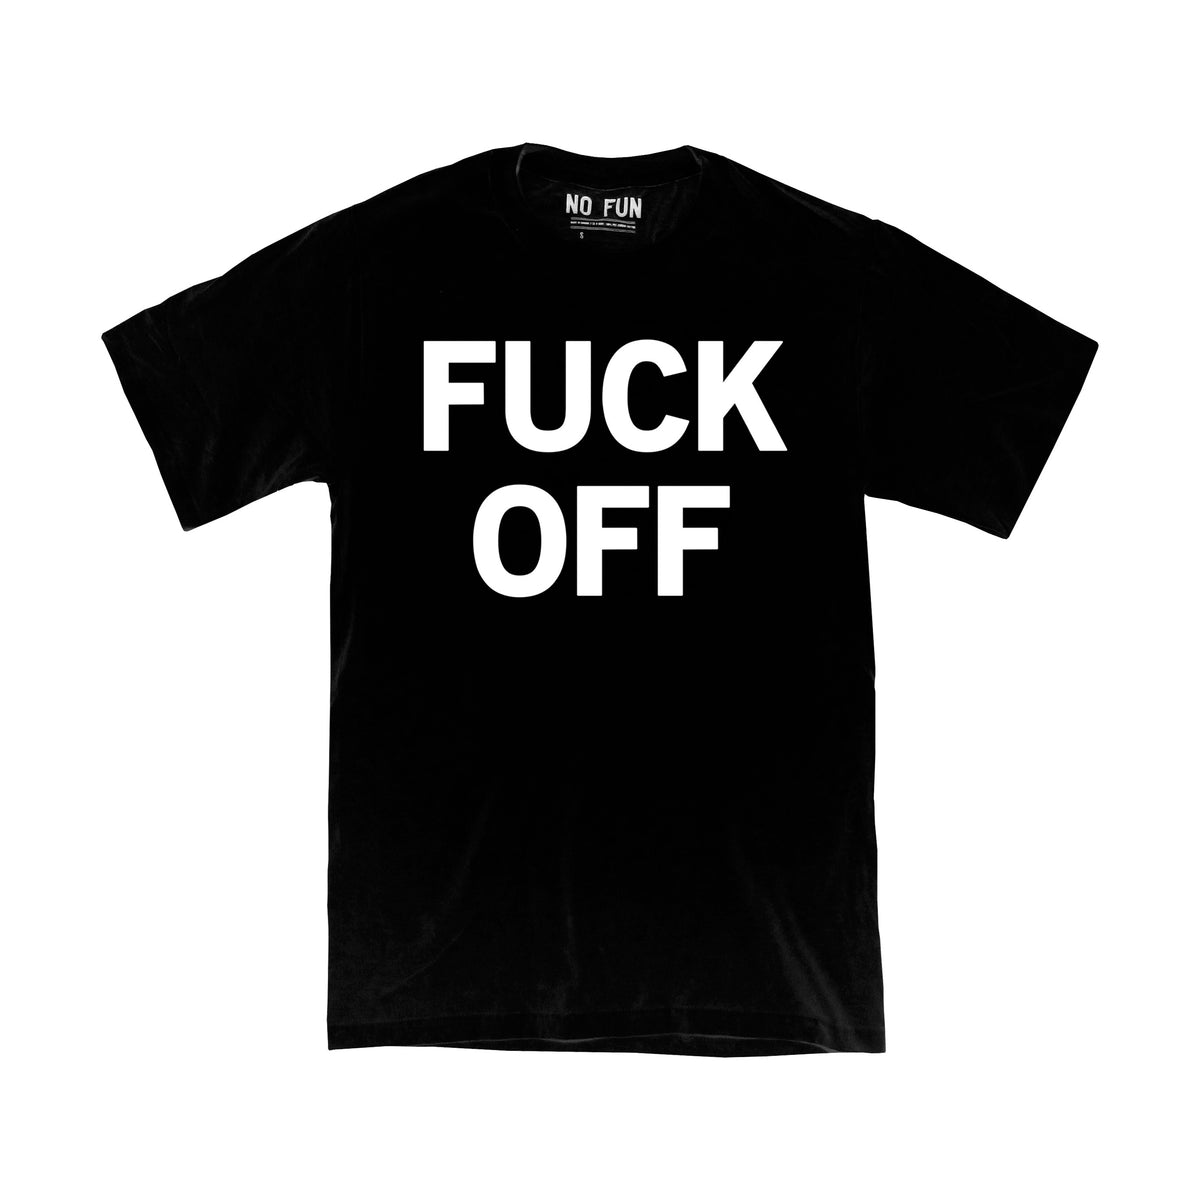 The "Fuck Off" T-Shirt by No Fun®.  The t-shirt is black, and photographed against a white background.  The graphic that is found of the front of the t-shirt includes the phrase "FUCK OFF" written in white, in large capital block letters.  